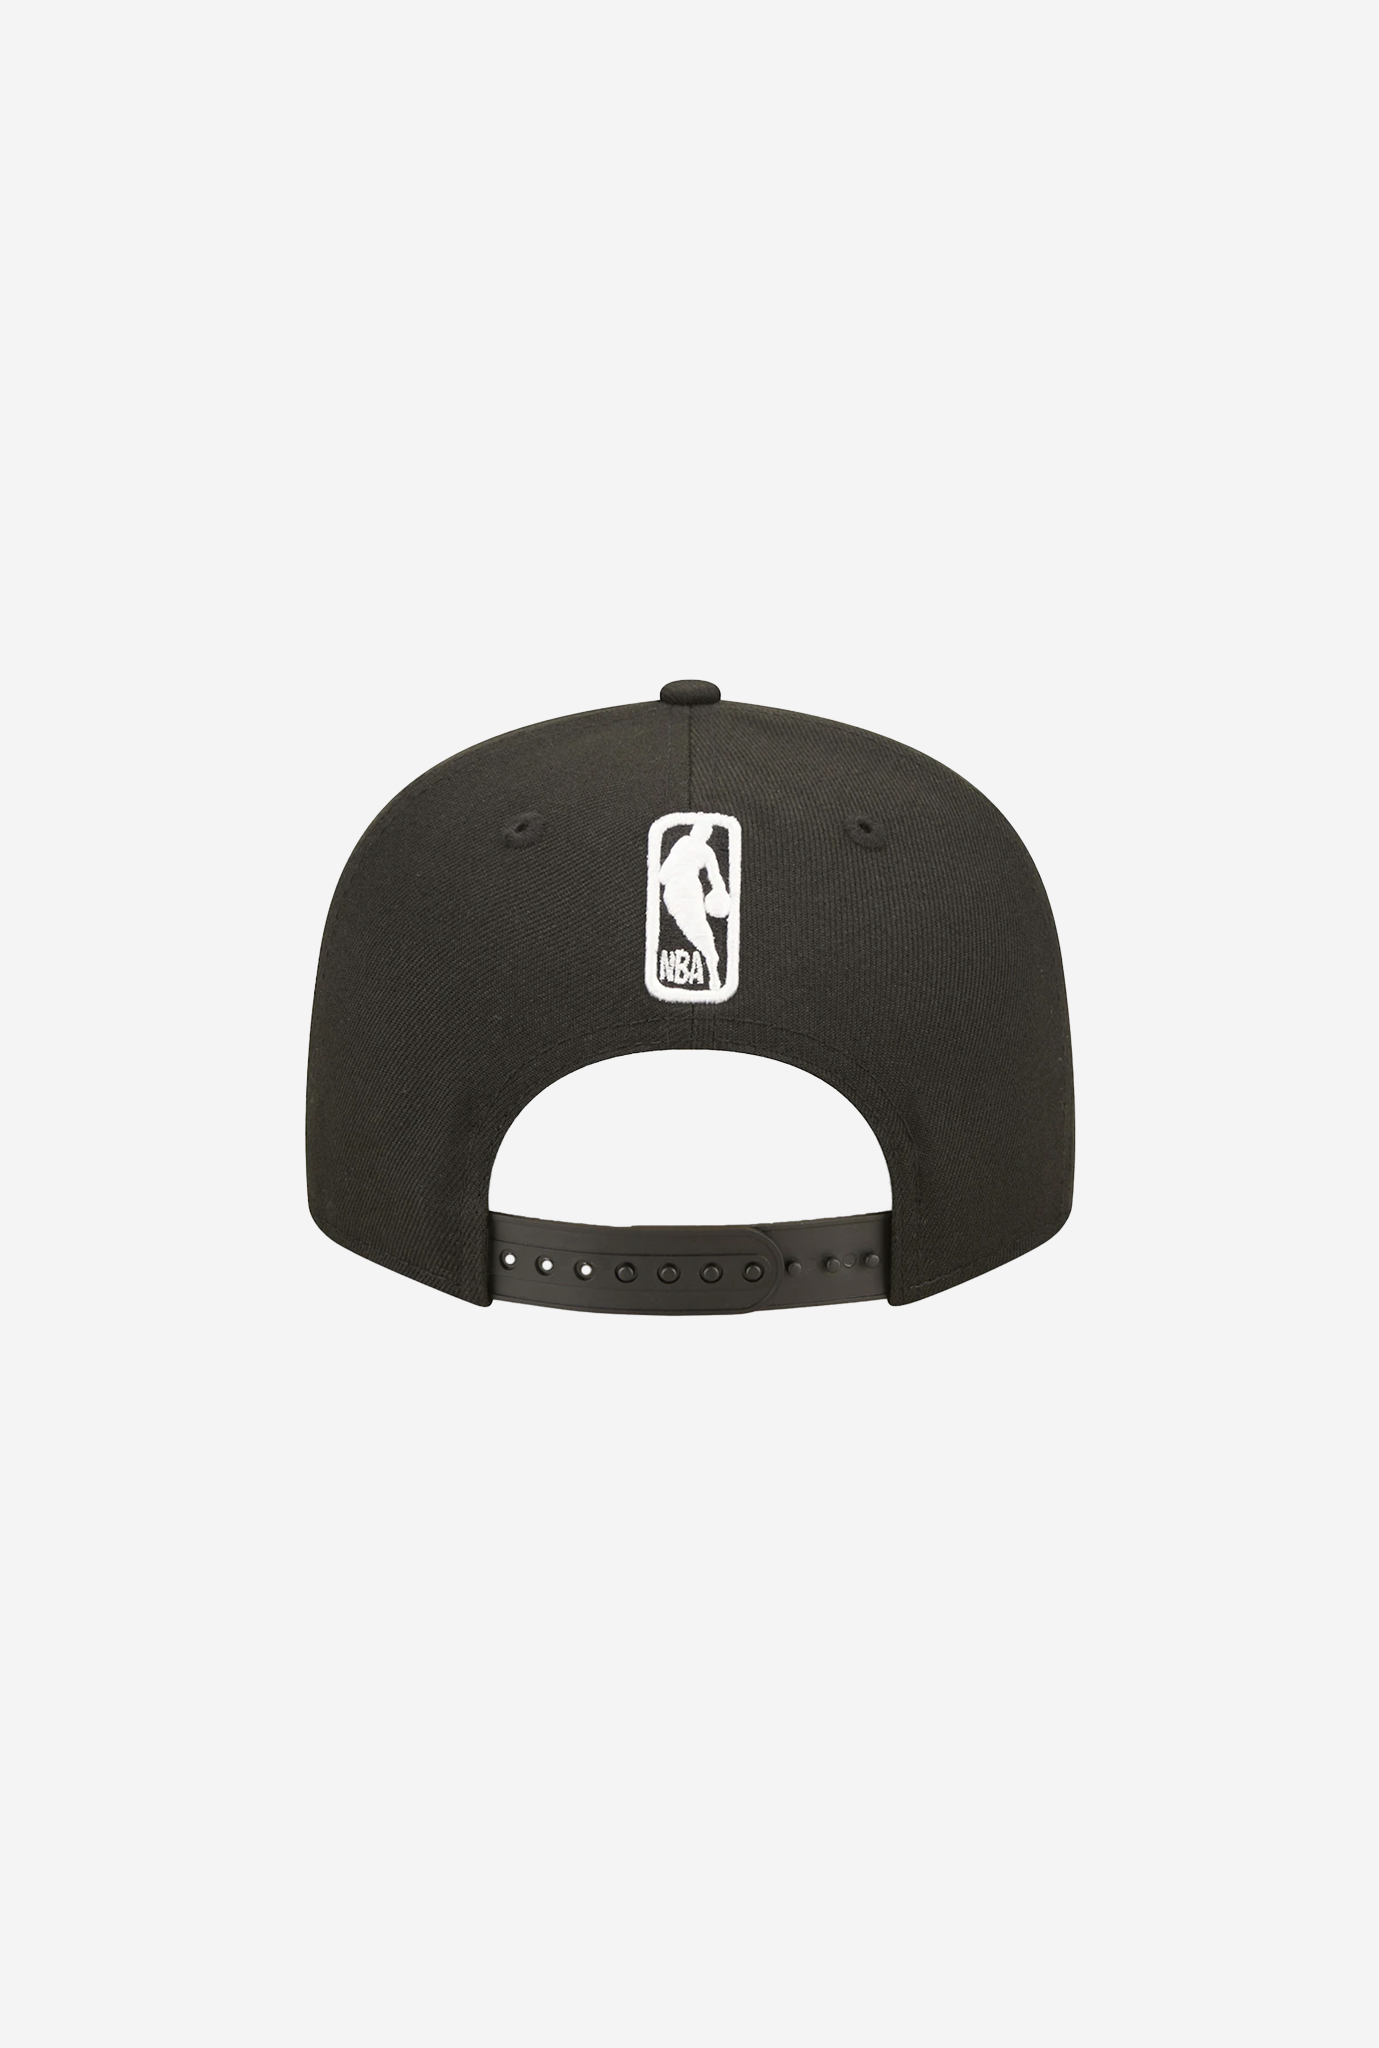 Los Angeles Clippers NBA City Edition '22 ALT 9FIFTY